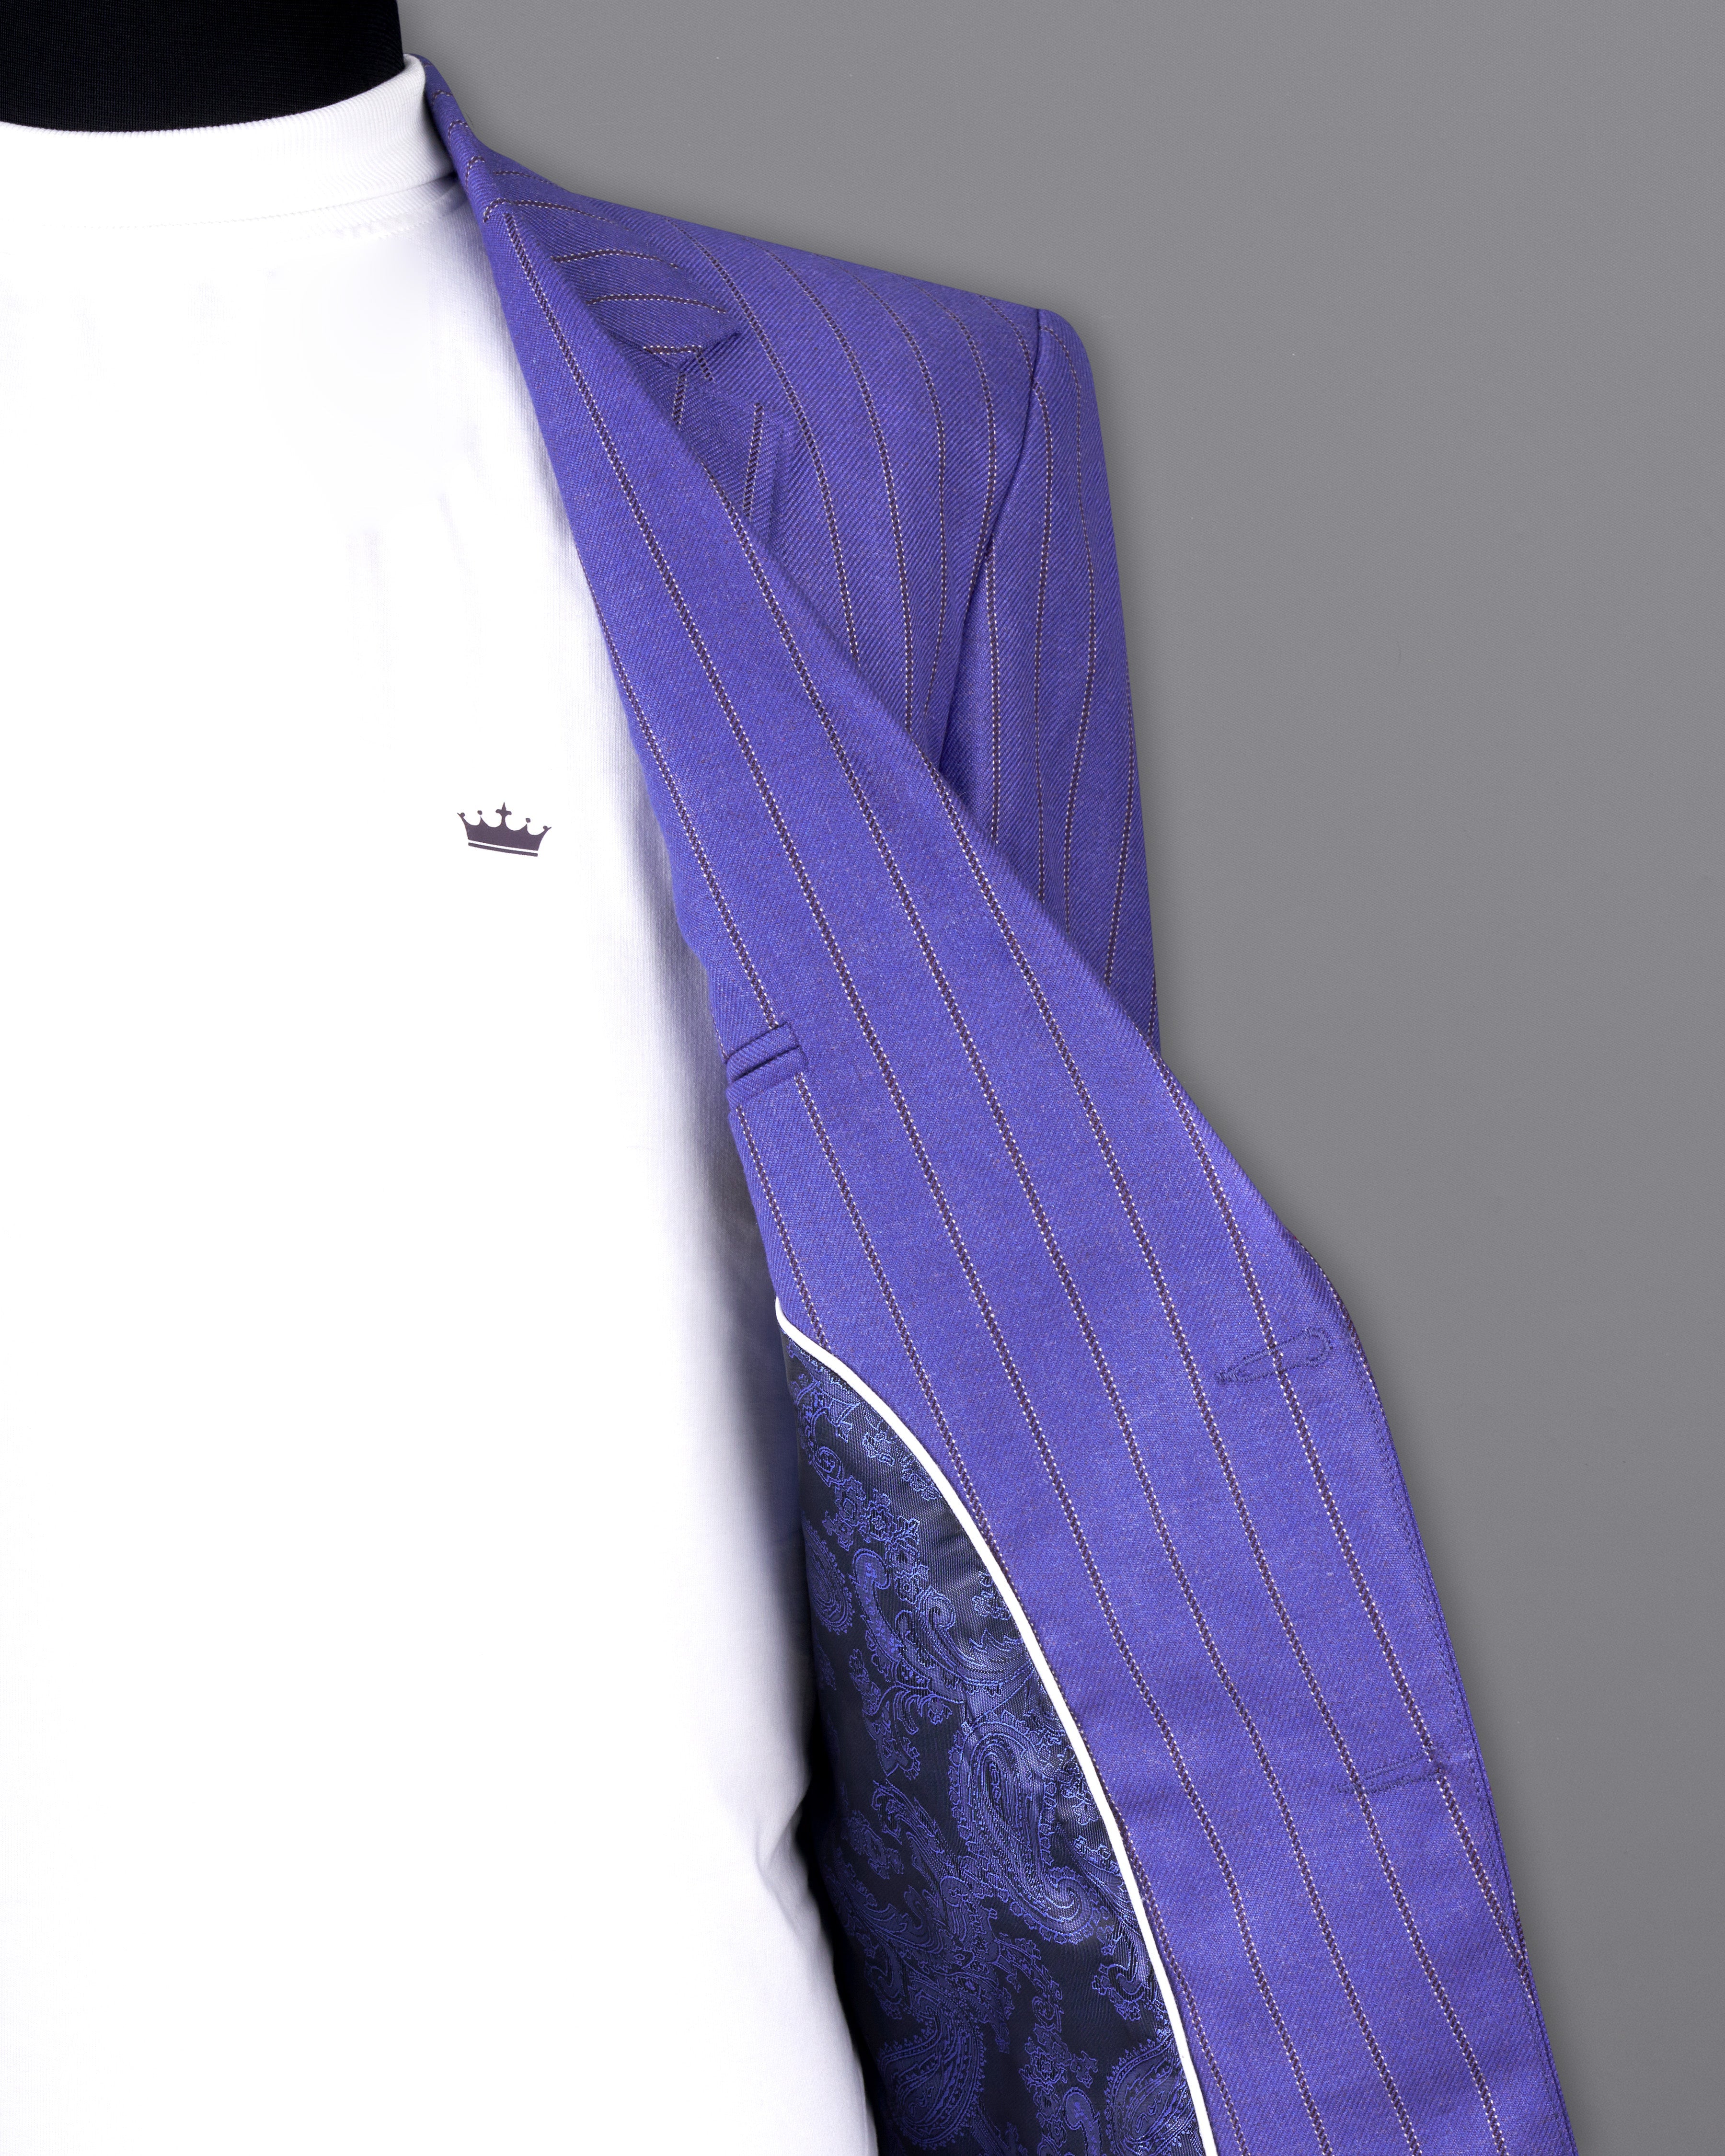 Deluge Blue Striped Single Breasted Suit ST2568-SB-PP-D150-36,ST2568-SB-PP-D150-38,ST2568-SB-PP-D150-40,ST2568-SB-PP-D150-42,ST2568-SB-PP-D150-44,ST2568-SB-PP-D150-46,ST2568-SB-PP-D150-48,ST2568-SB-PP-D150-50,,ST2568-SB-PP-D150-52,ST2568-SB-PP-D150-54,ST2568-SB-PP-D150-56,ST2568-SB-PP-D150-58,ST2568-SB-PP-D150-60